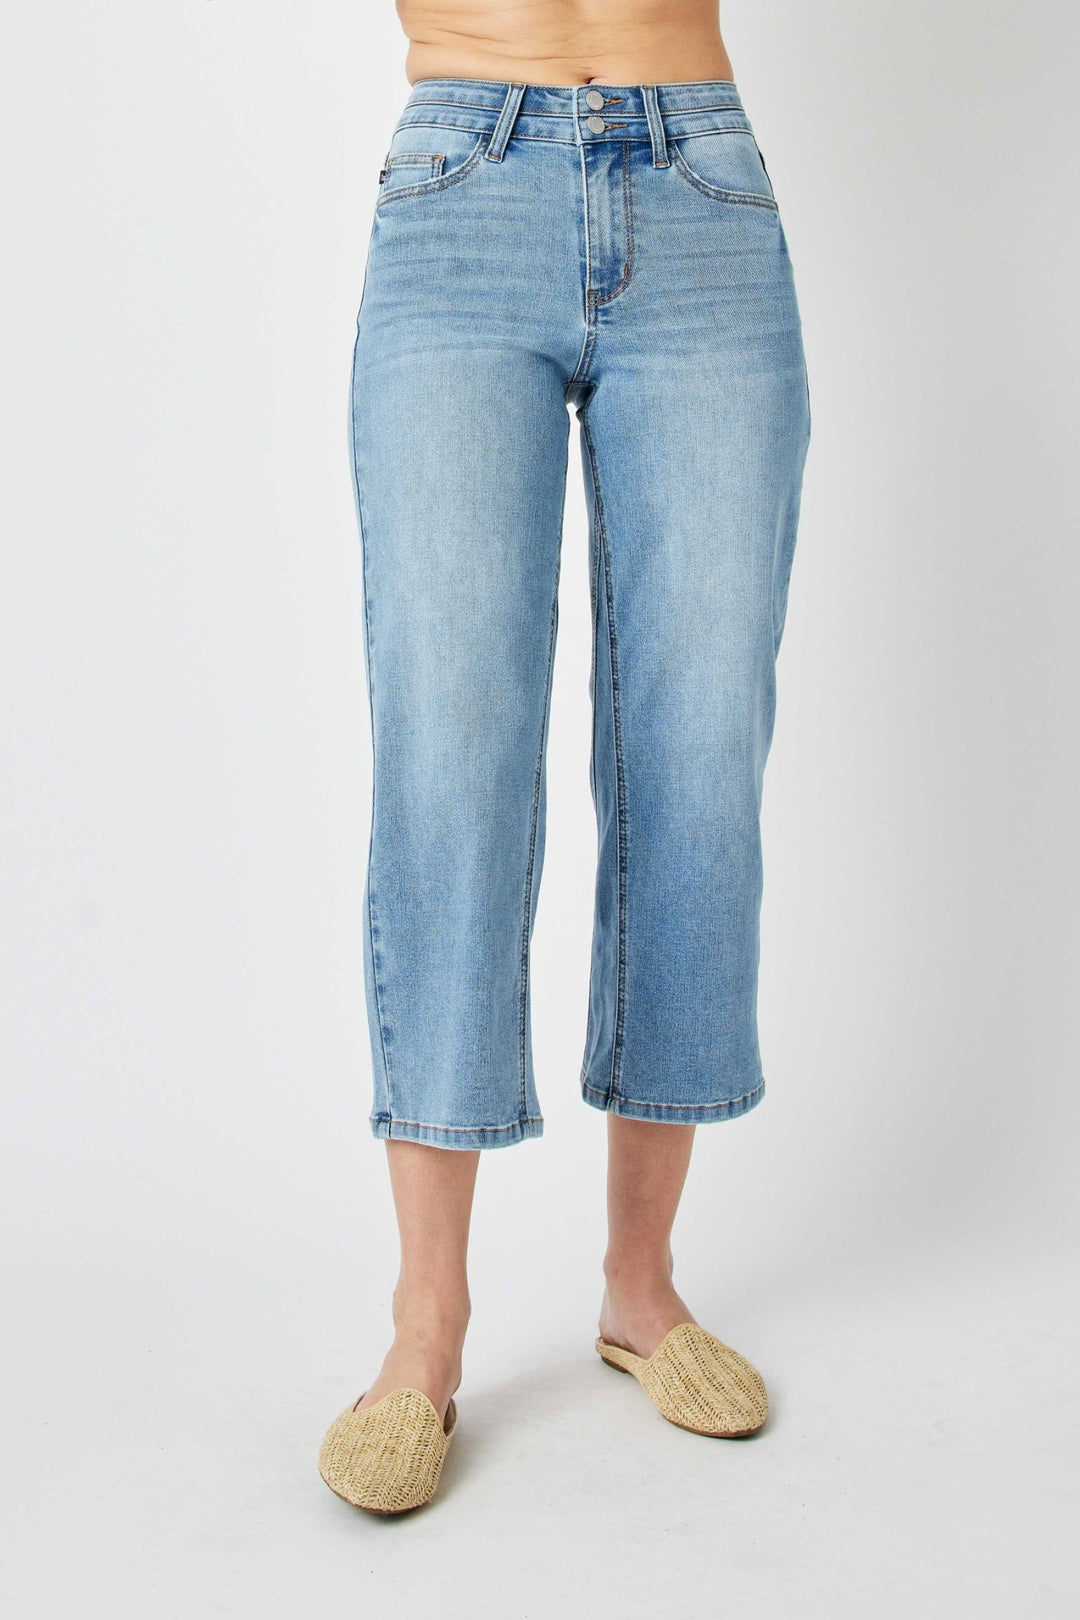 Front View. Judy Blue High Waist Cropped Wide Leg Jeans-Jeans-Judy Blue-Evergreen Boutique, Women’s Fashion Boutique in Santa Claus, Indiana